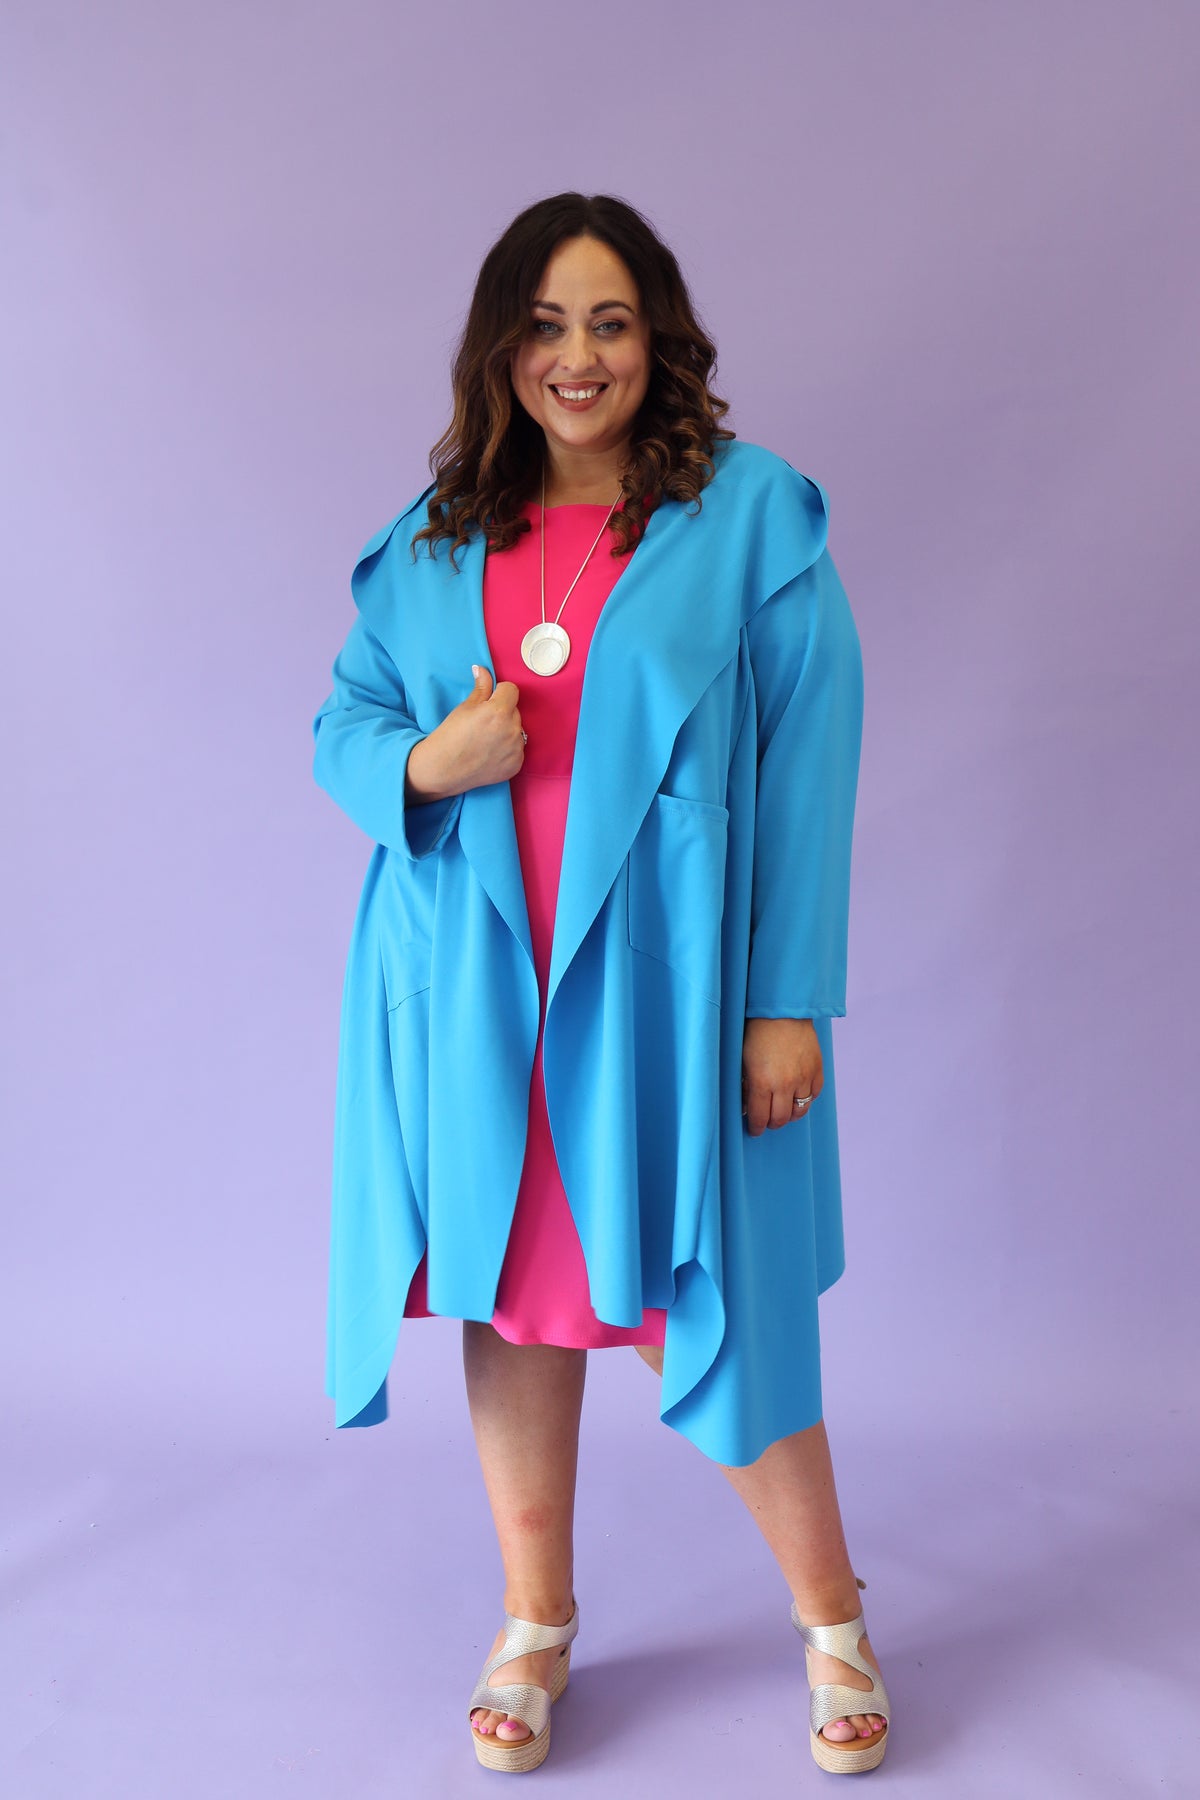 Macy Jacket in Turquoise